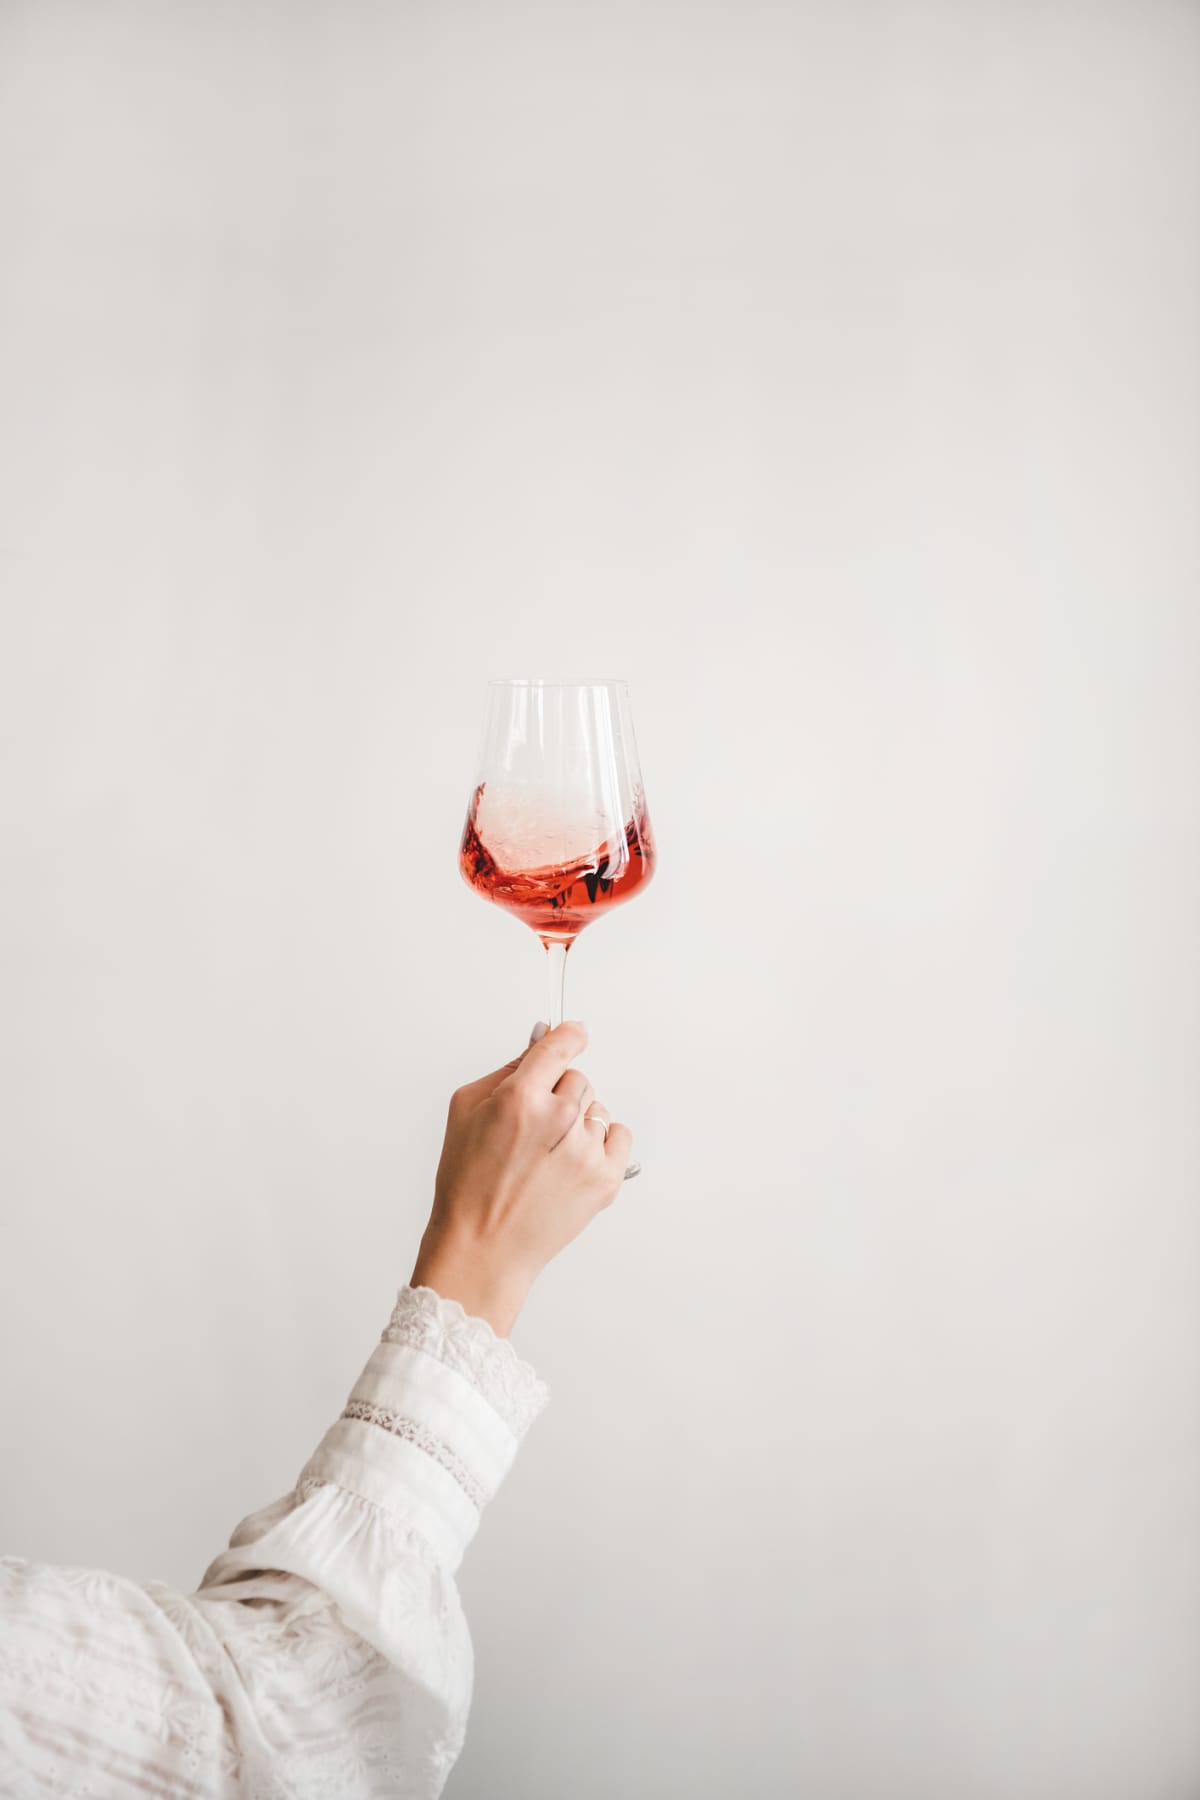 Woman's hand holding wine glass